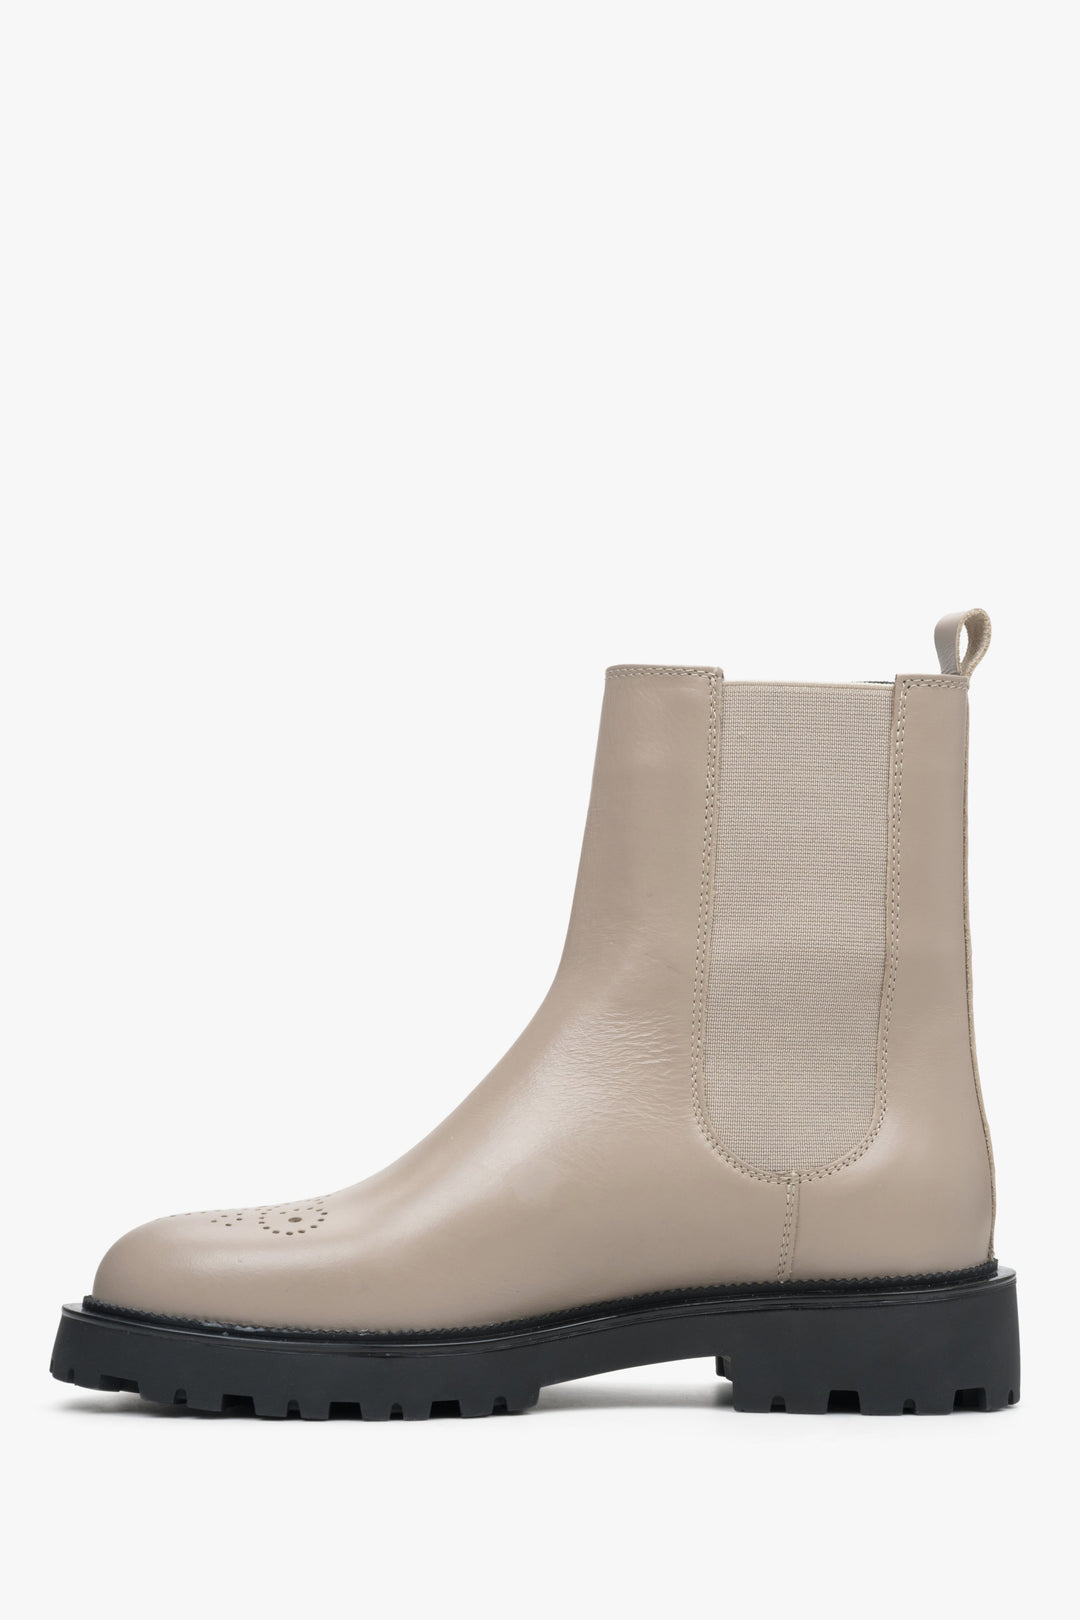 Women's beige and grey leather ankle boots - profile view of the Estro brand boot.